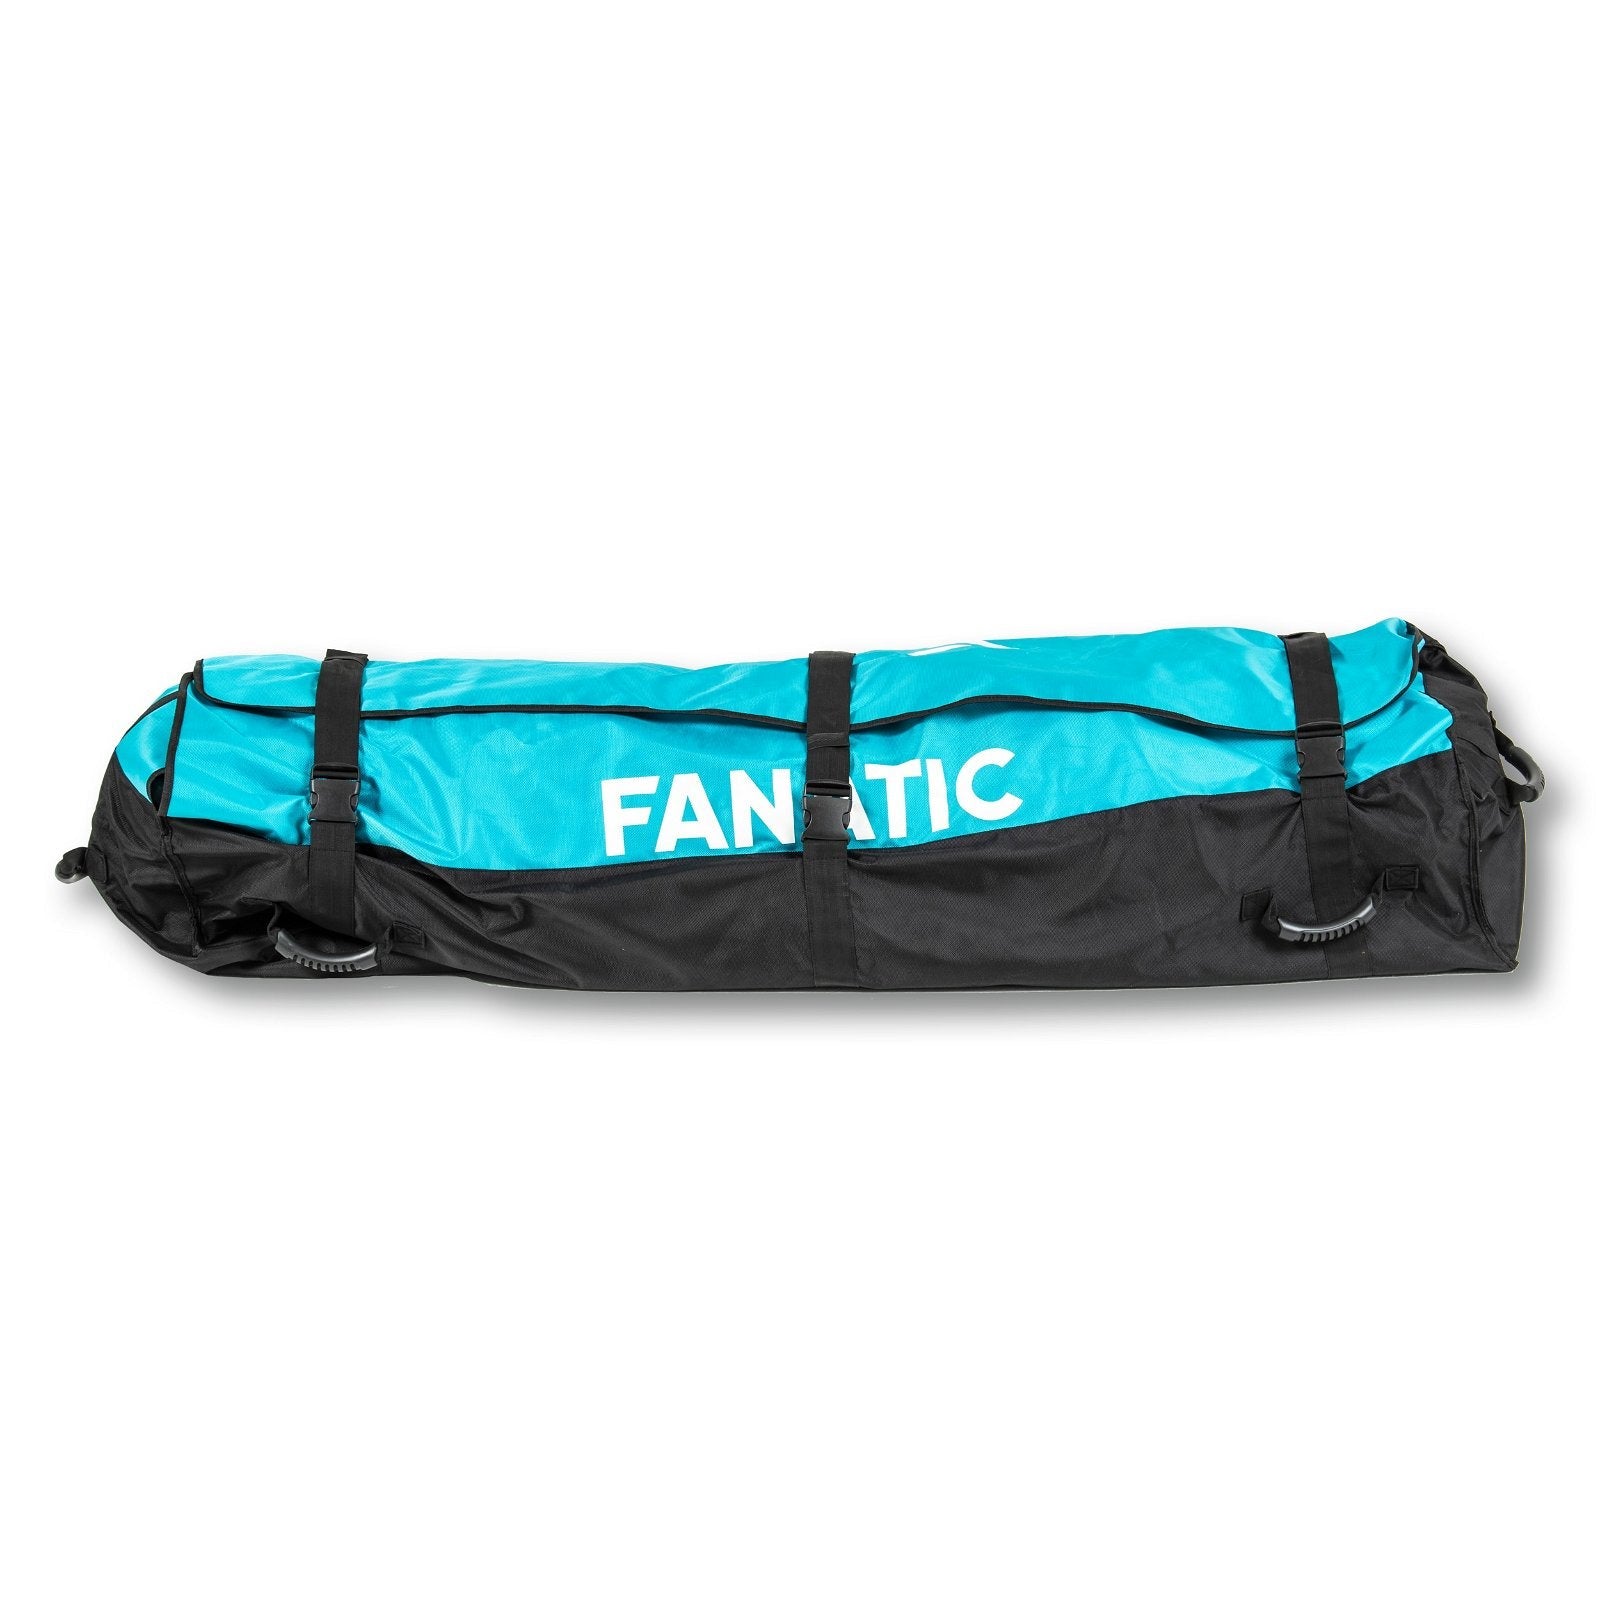 FANATIC Gearbag Fly Air XL 2024-Fanatic SUP-160x46cm-turquoise-13200-7006-9008415928071-Surf-store.com